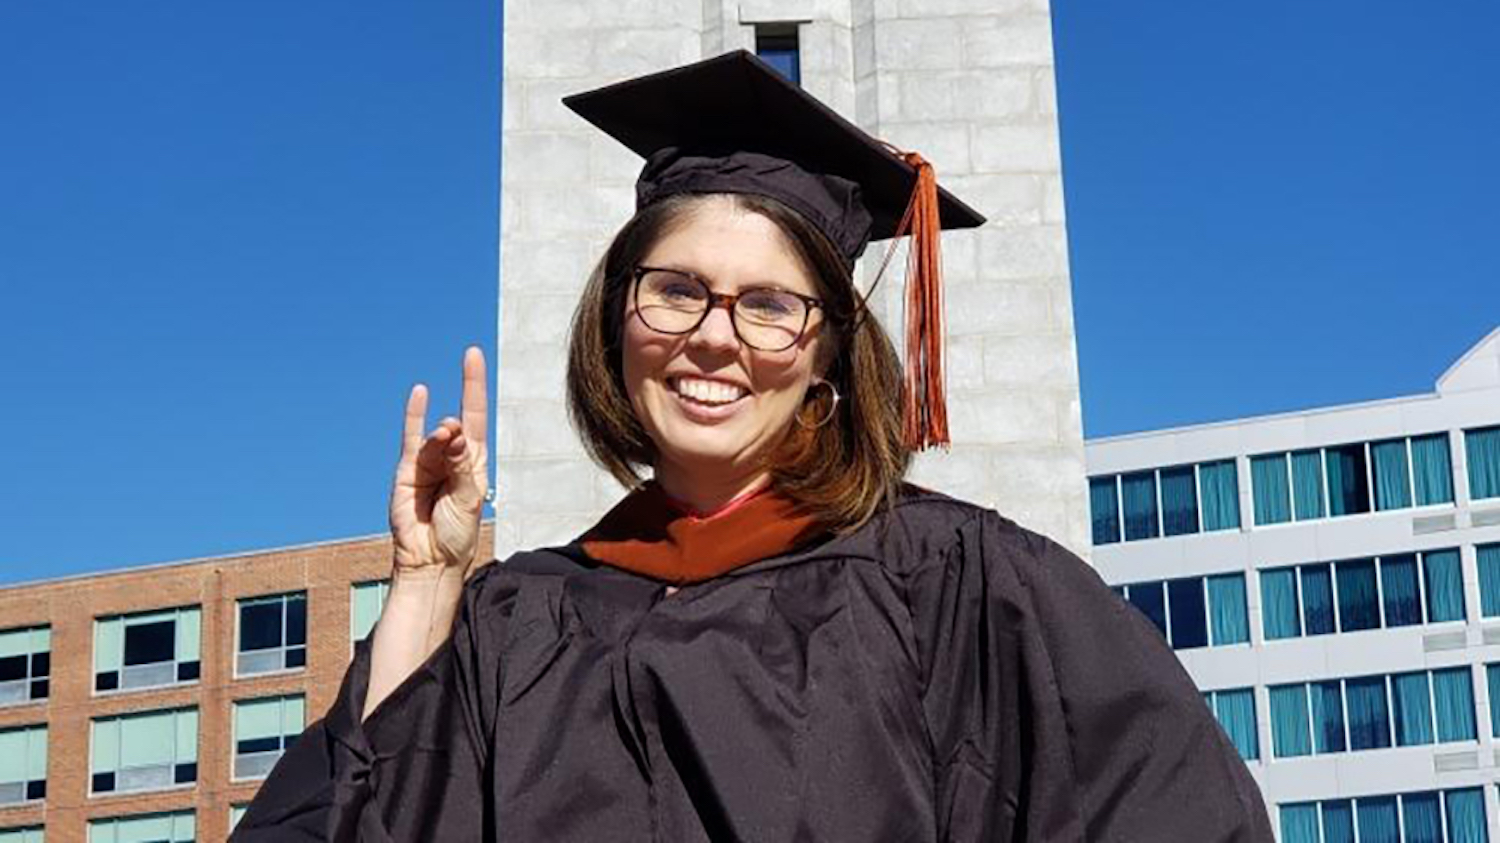 Kim Garrett gesturing with the“Wolfie” hand symbol in front of the Memorial Belltower on the NC State campus.